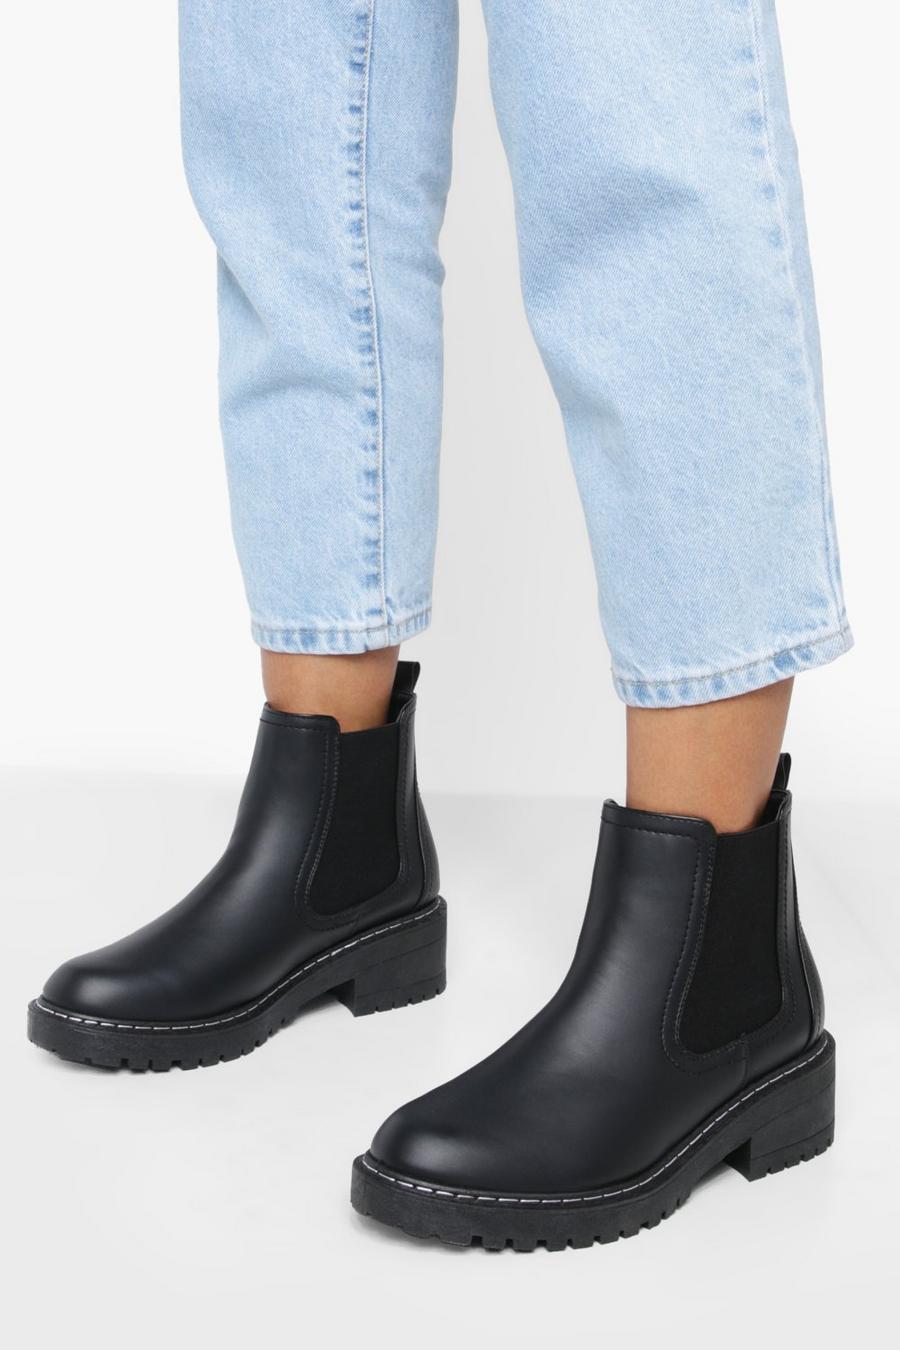 Black Wide Width Contrast Stitch Chelsea Boots